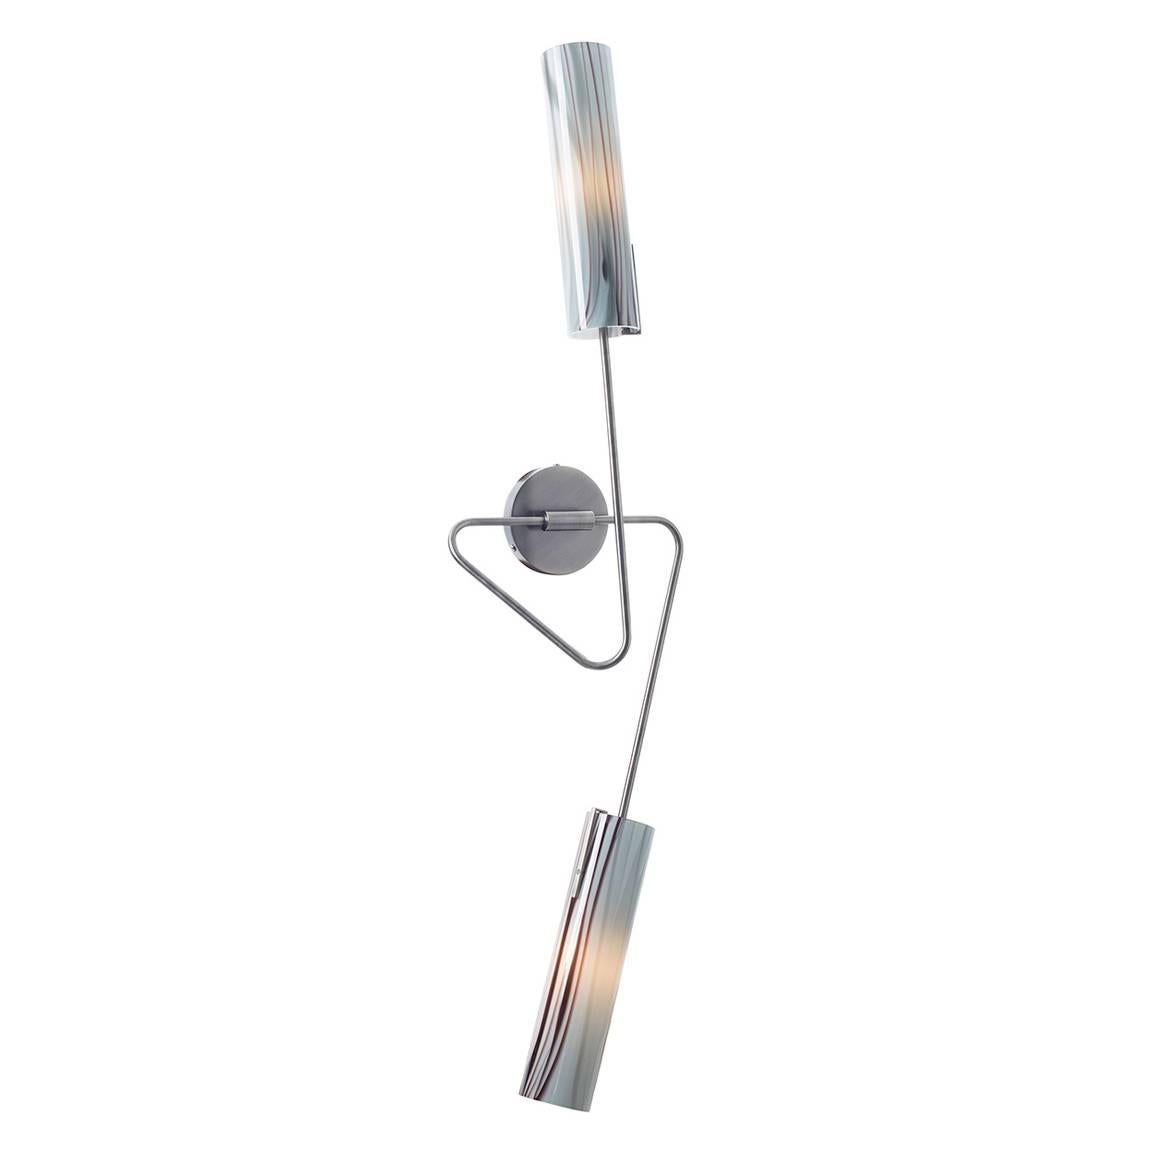 Continuum 02 Sconce: Pewter/White Glass, Topaz/Grey Stripes by Avram Rusu Studio In New Condition For Sale In Brooklyn, NY